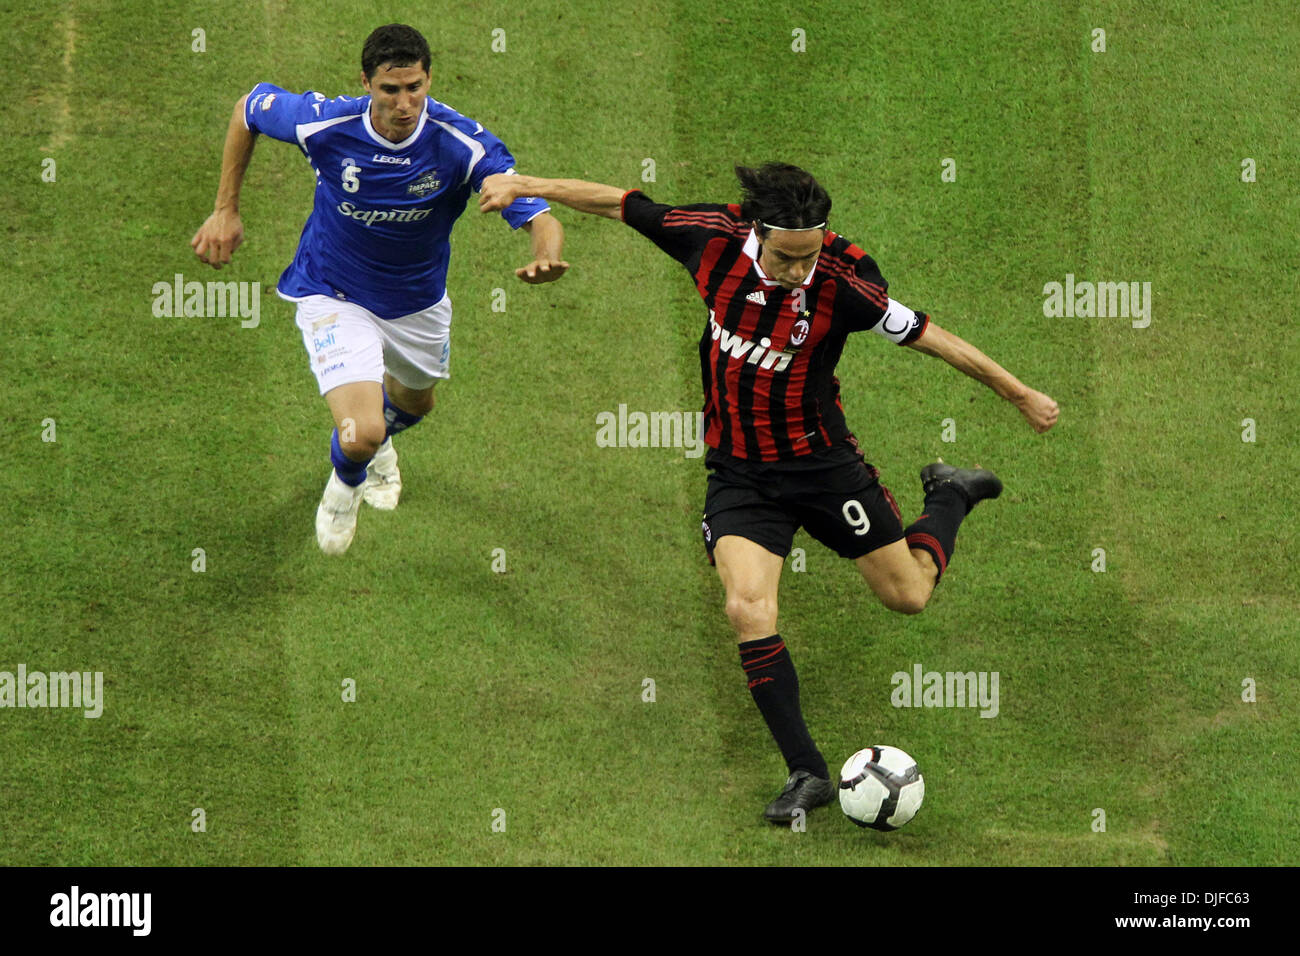 June 03, 2010 - Montreal, Quebec, Canada - 2 June 2010:  Montreal Impact's defender Nevio Pizzolitto (#5) battle for the ball with AC Milan's forward Filippo Inzaghi (#9) in game action during the first half of play of the friendly FIFA exhibition game between AC Milan and the Montreal Imapct played at the Olympic Stadium in Montreal, Canada. AC Milan won 4-1..Mandatory Credit: Phi Stock Photo